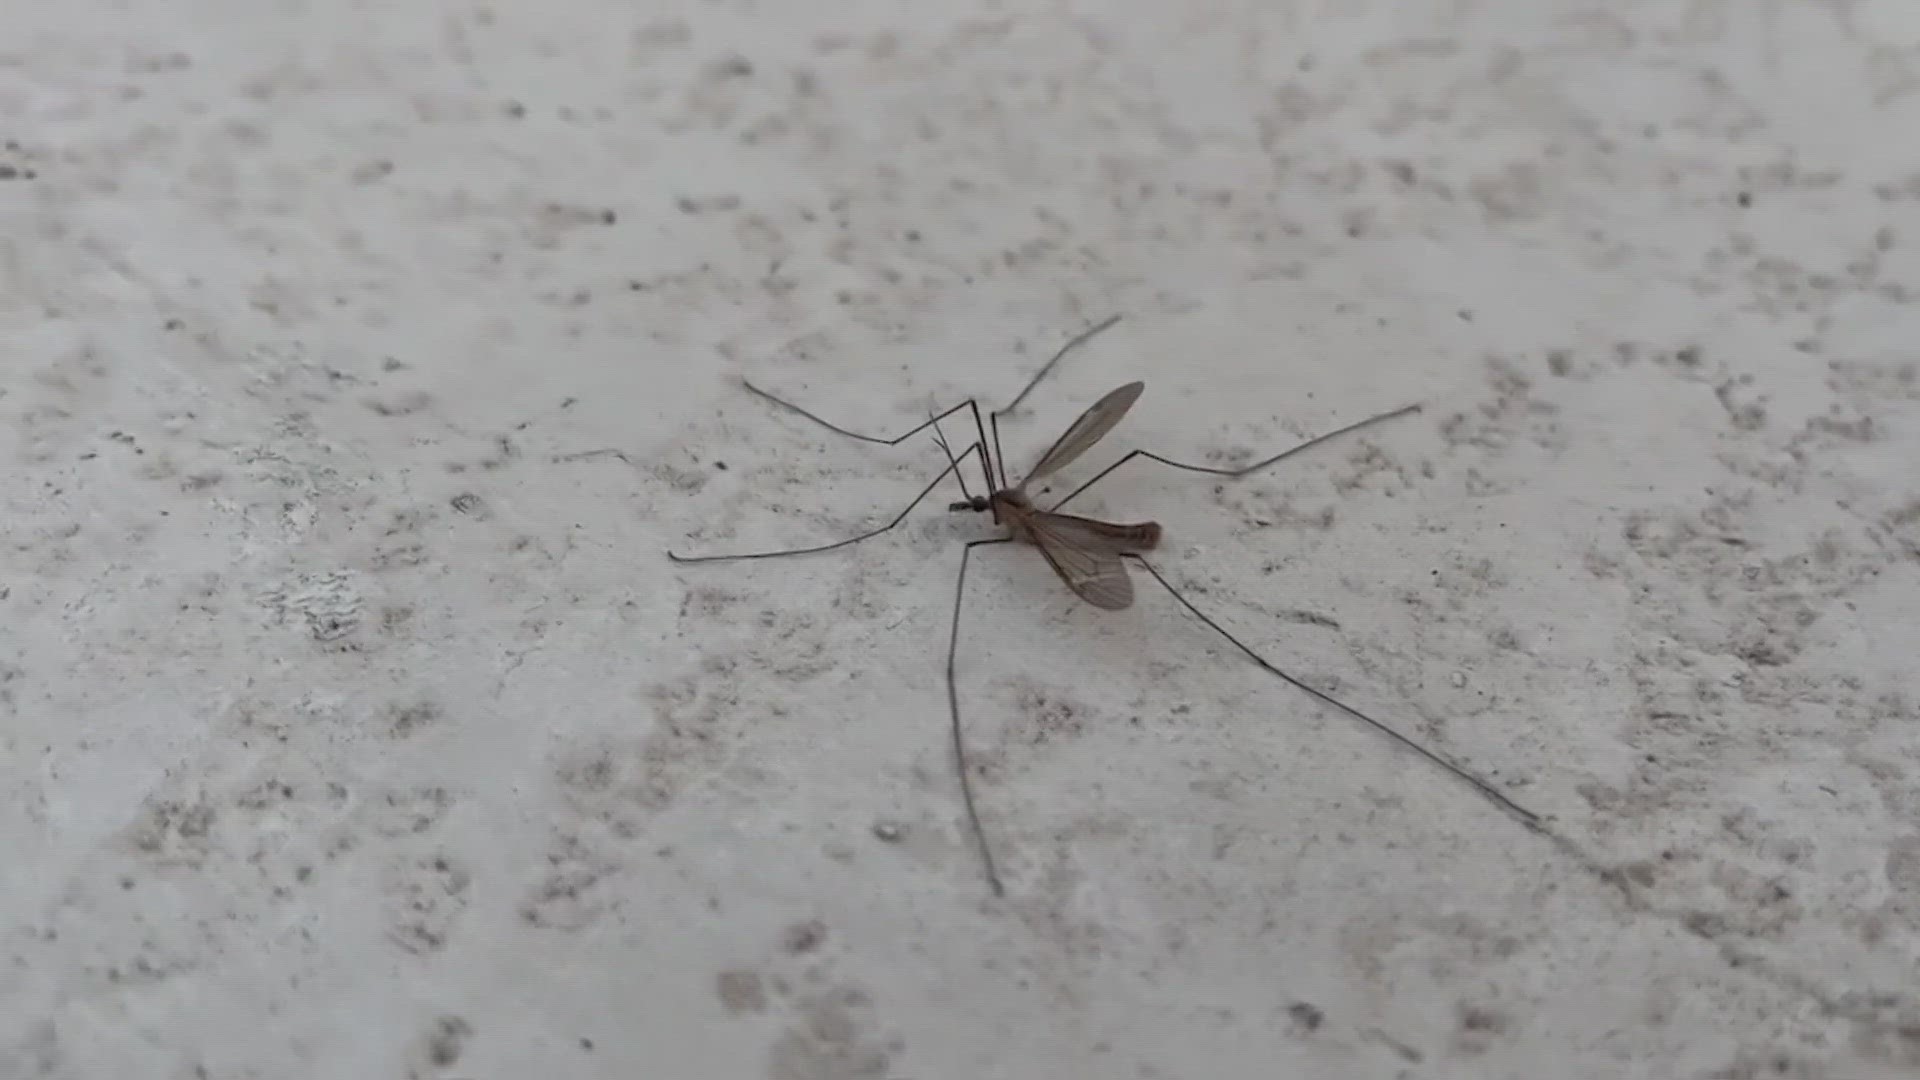 San Antonio experts say the crane fly is a misunderstood insect